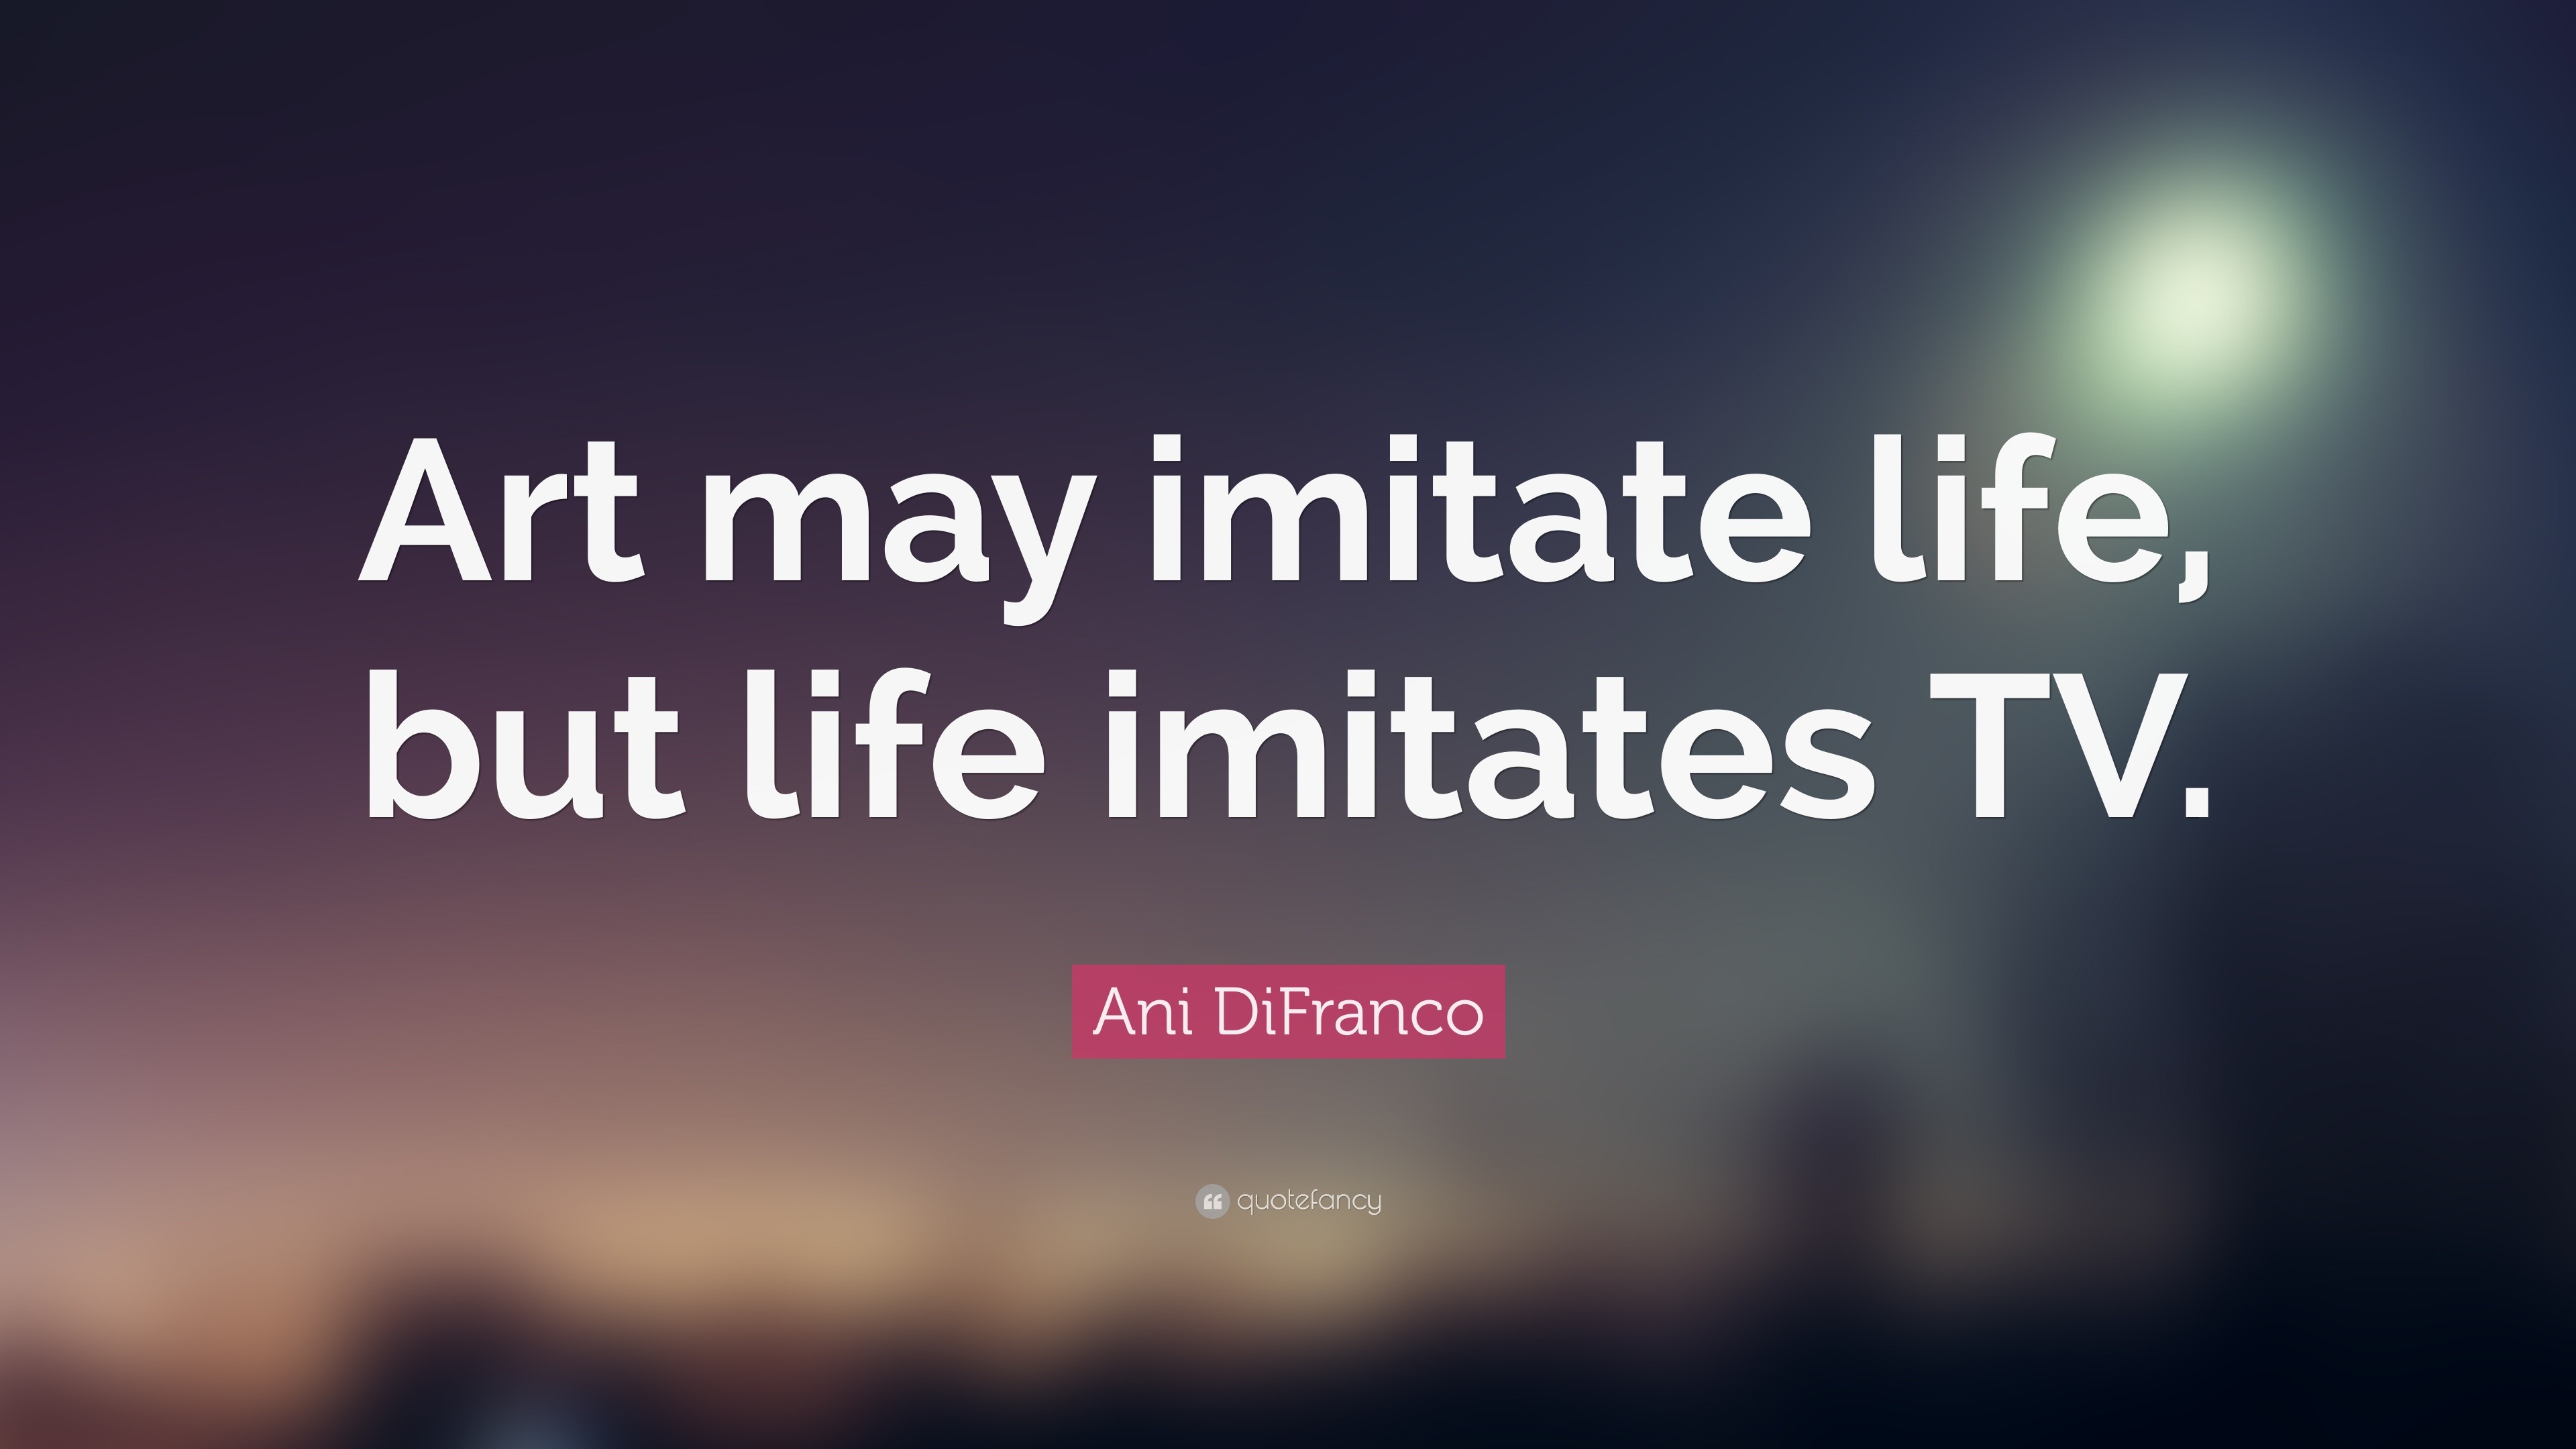 3. Ani DiFranco Quotes 100 wallpapers Quotefancy.